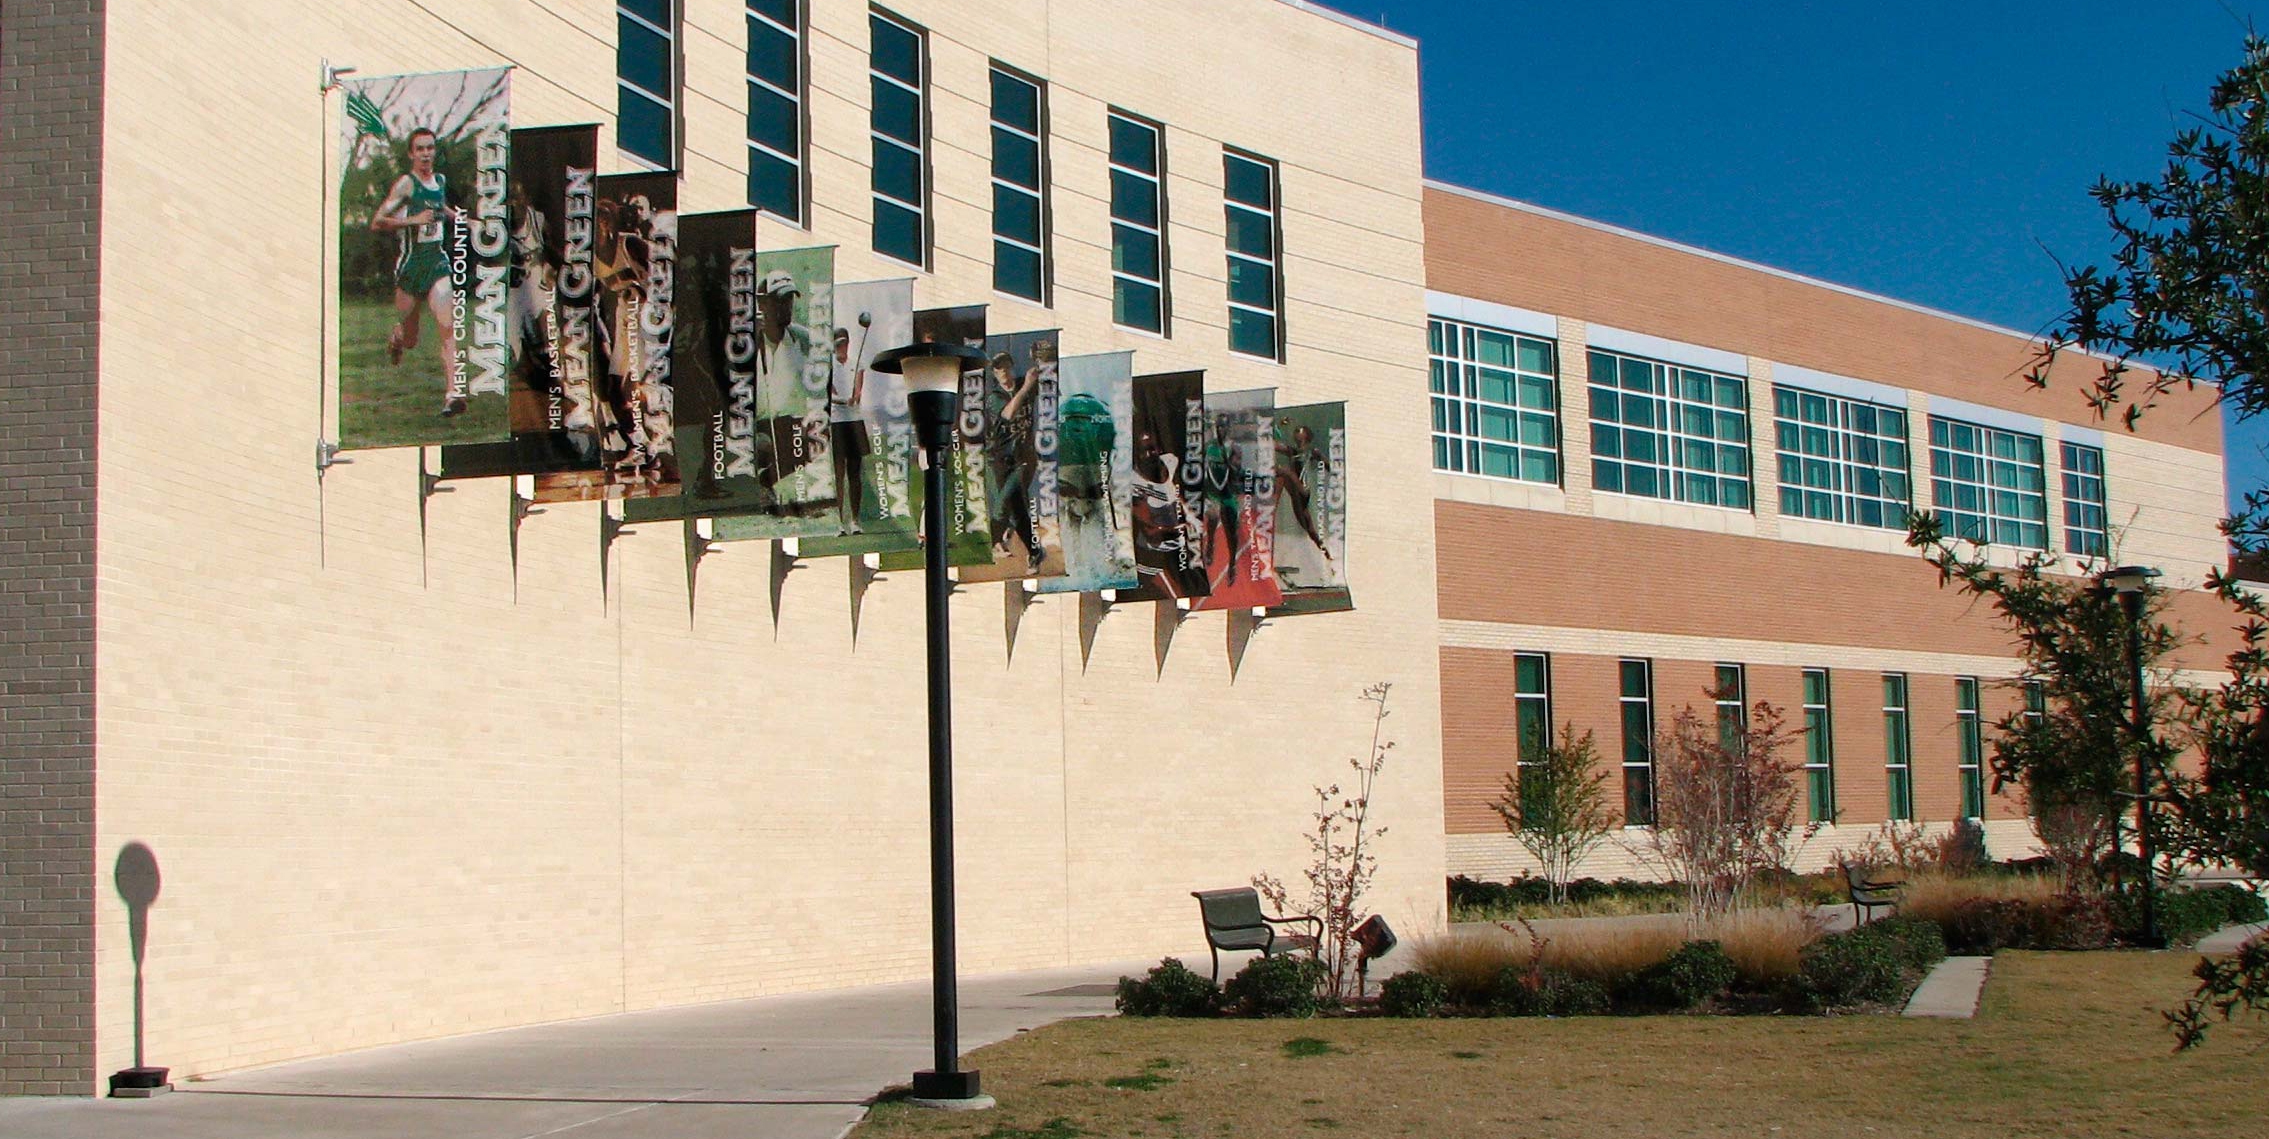 BannerSaver™ brackets mounted on a university building exterior wall